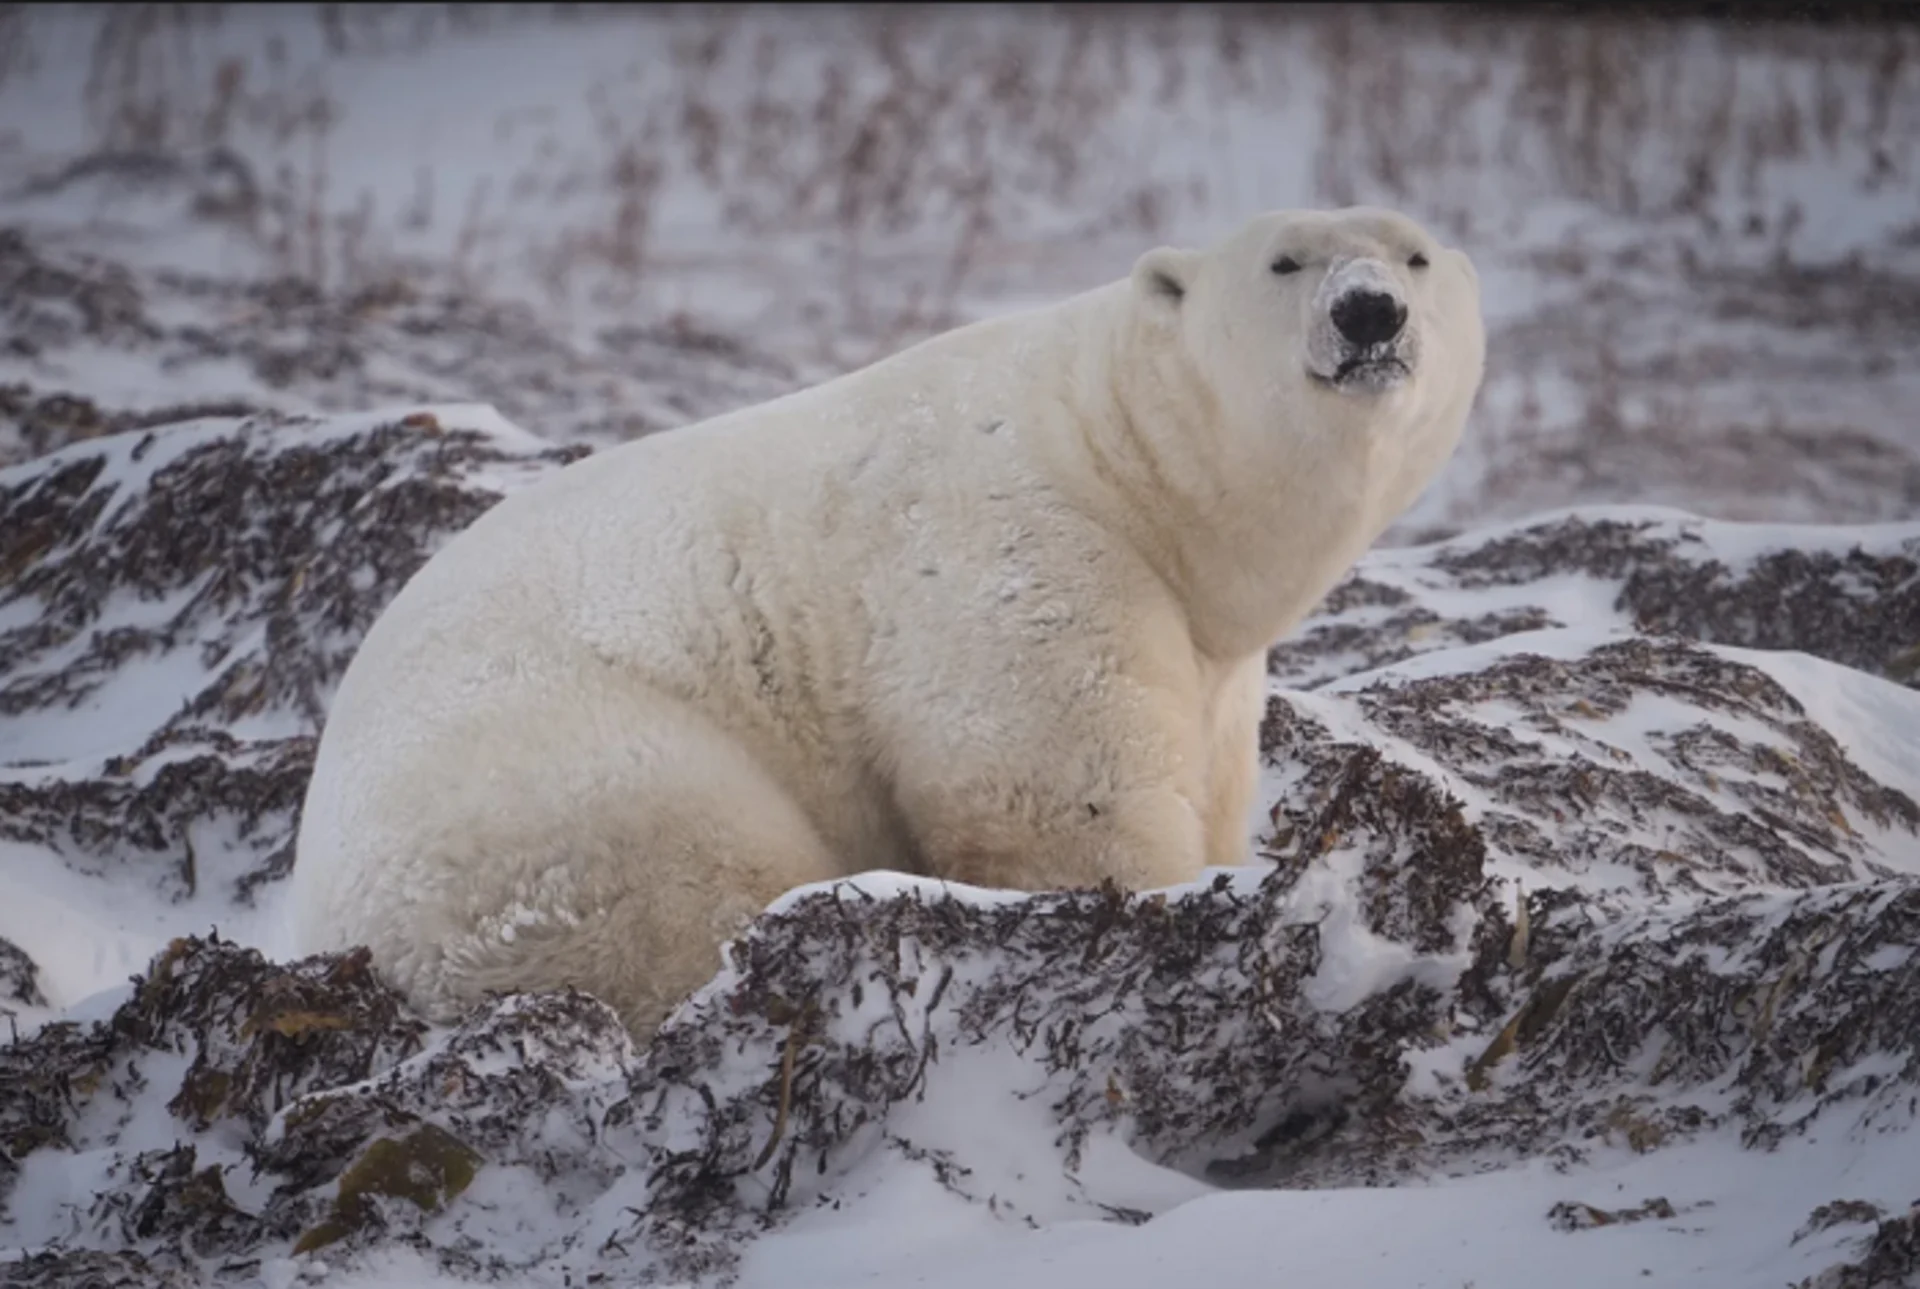 'Their fur isn't white': 5 facts about polar bears